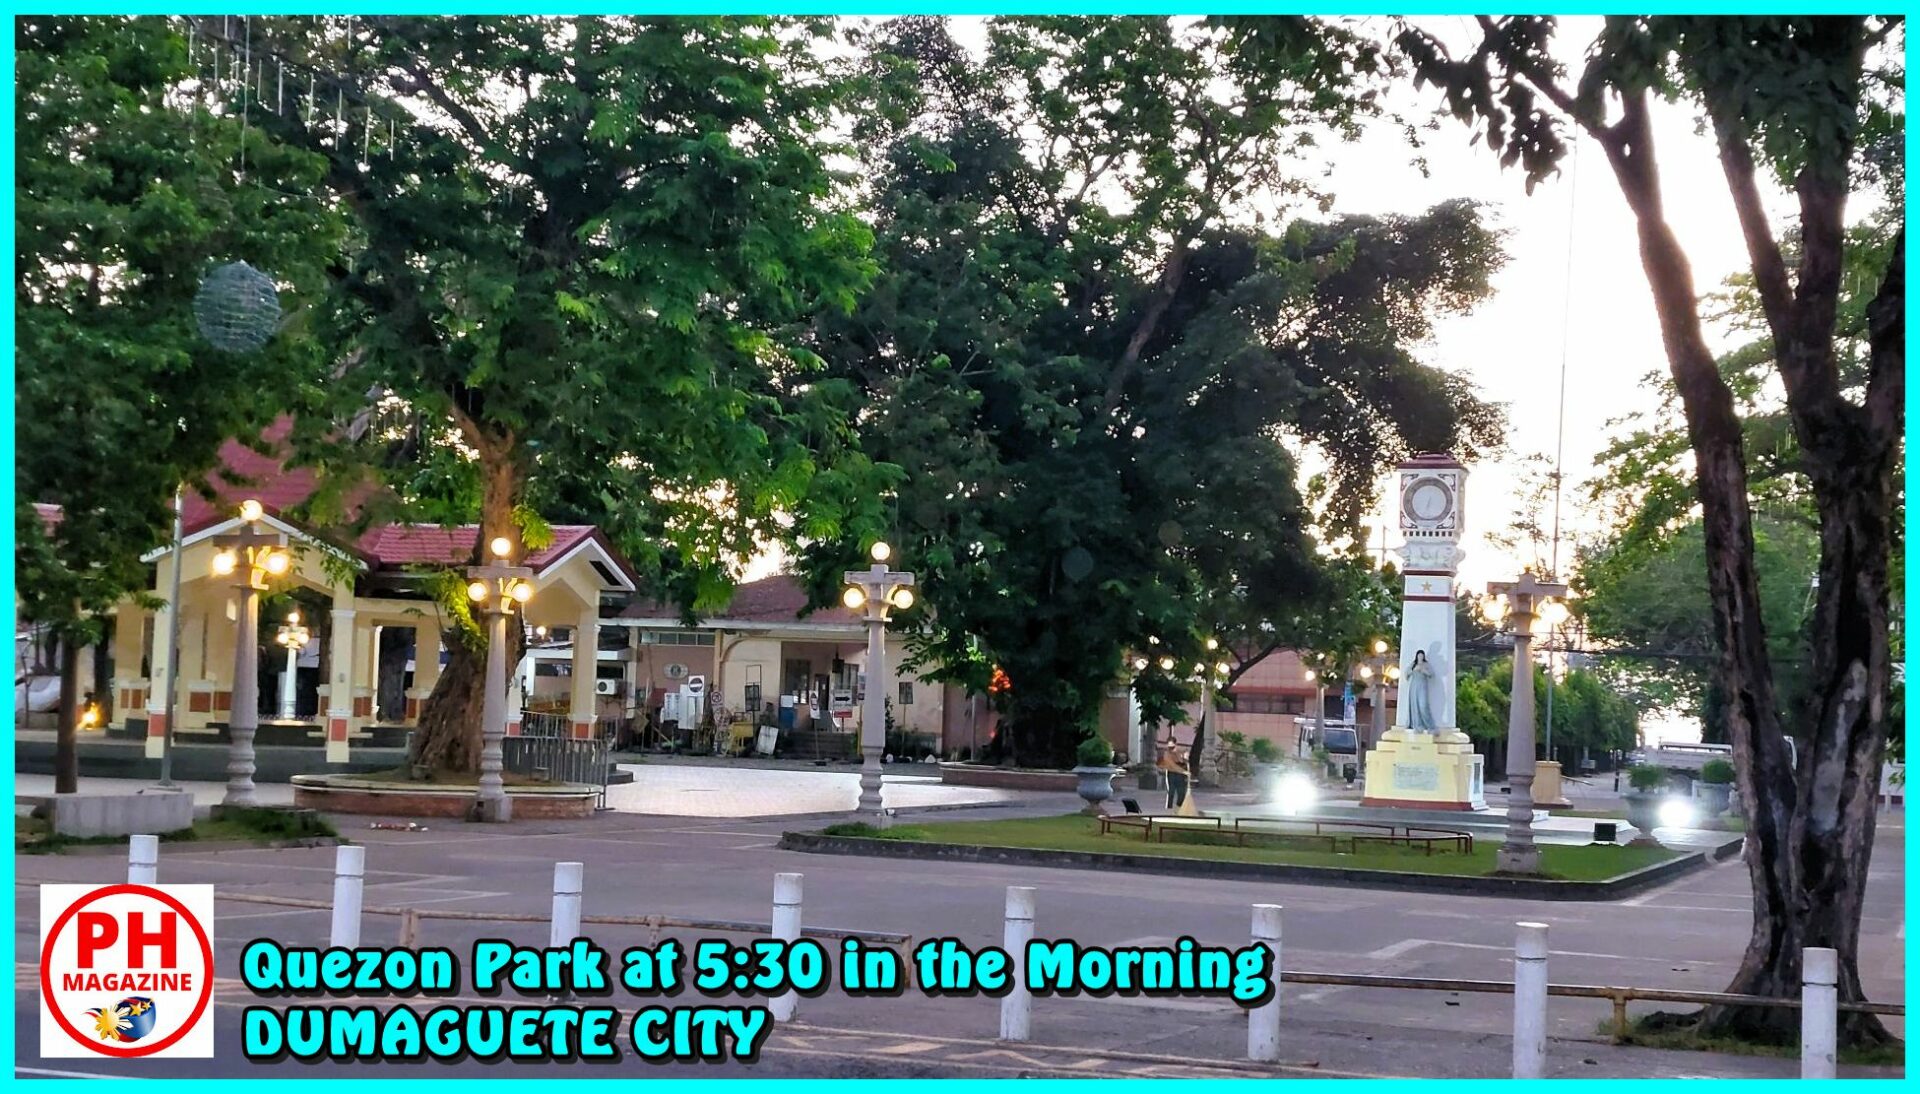 SIGHTS OF NEGROS - PHOTO OF THE DAY - Quezon Park at 5:30 in the Morning in Dumaguete City